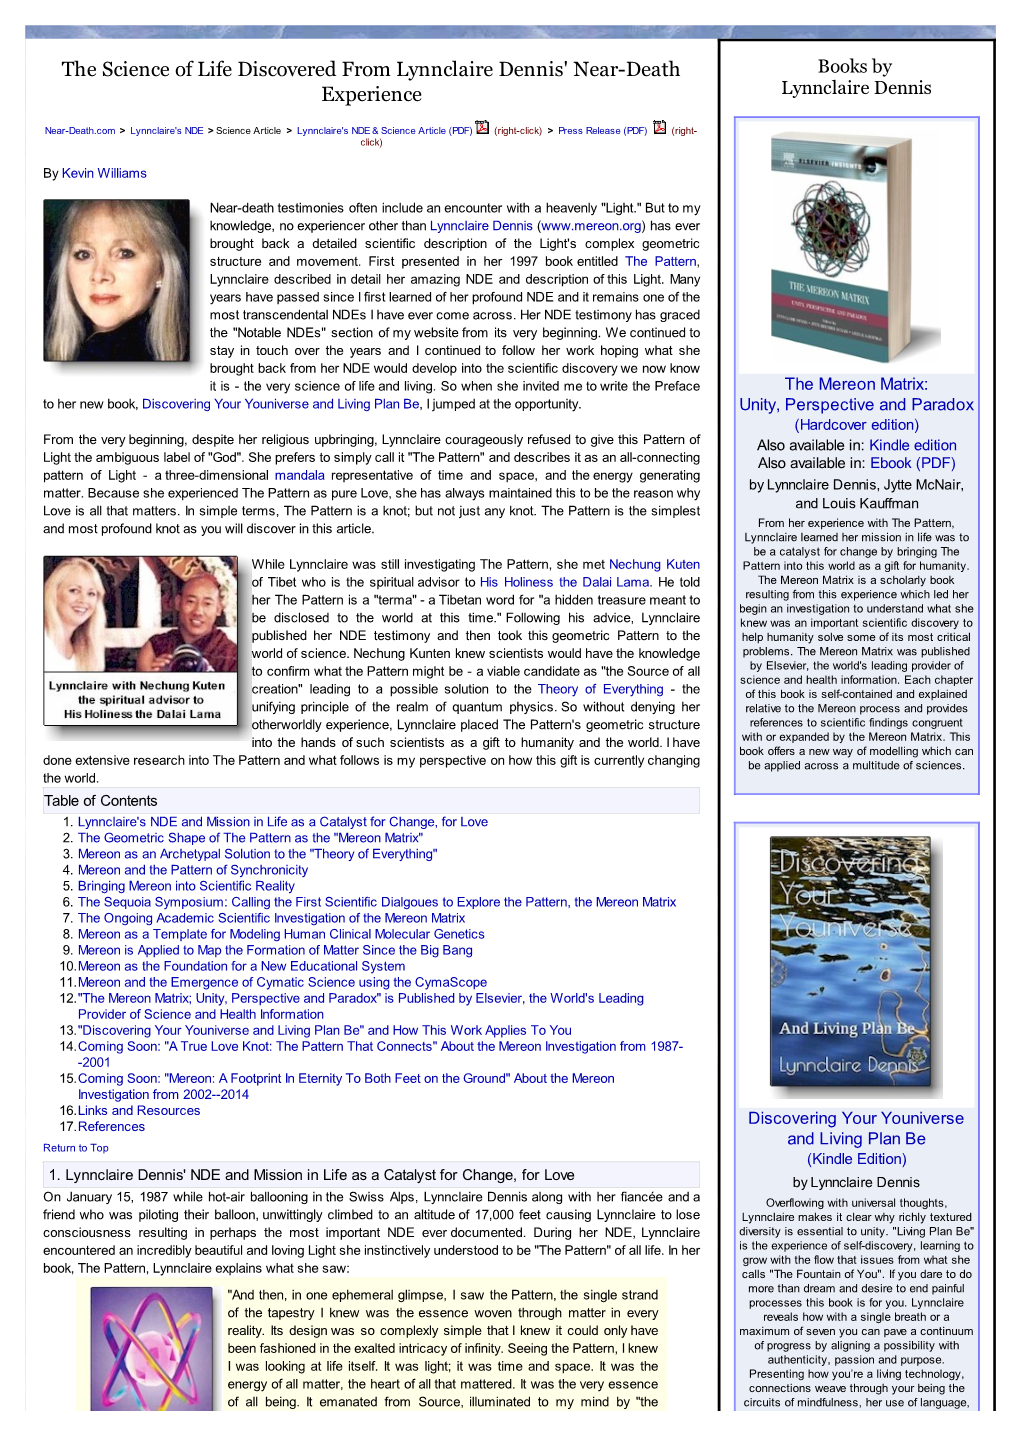 The Science of Life Discovered from Lynnclaire Dennis' Near-Death Books by Experience Lynnclaire Dennis